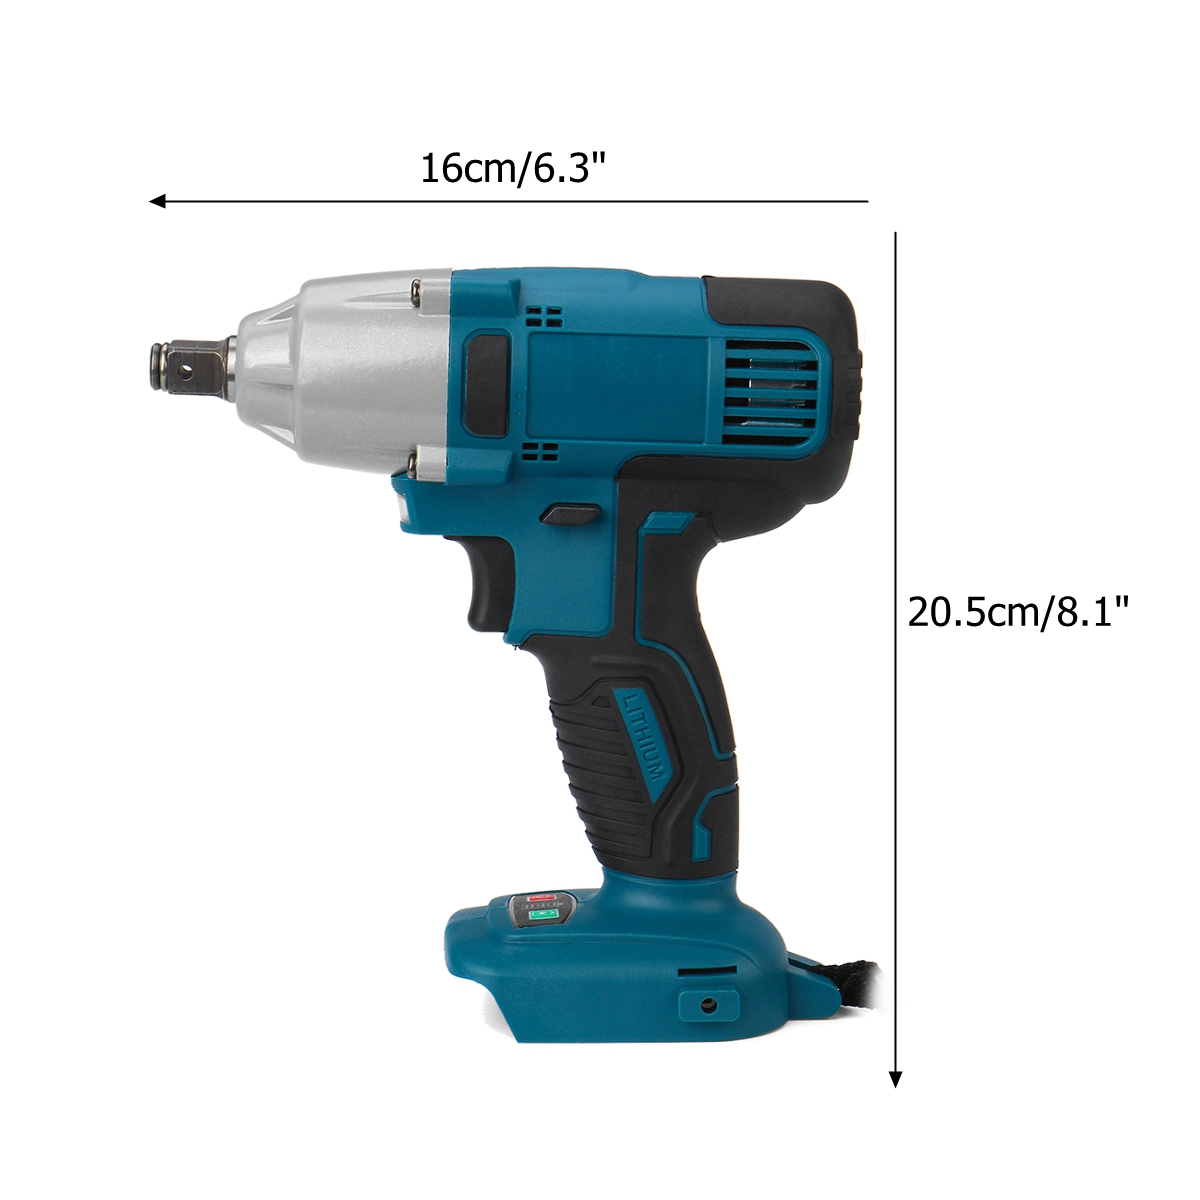 18V-480Nm-Li-Ion-Cordless-Impact-Wrench-Driver-12-Brushed-Electric-Wrench-Replacement-for-Makita-Bat-1658554-10